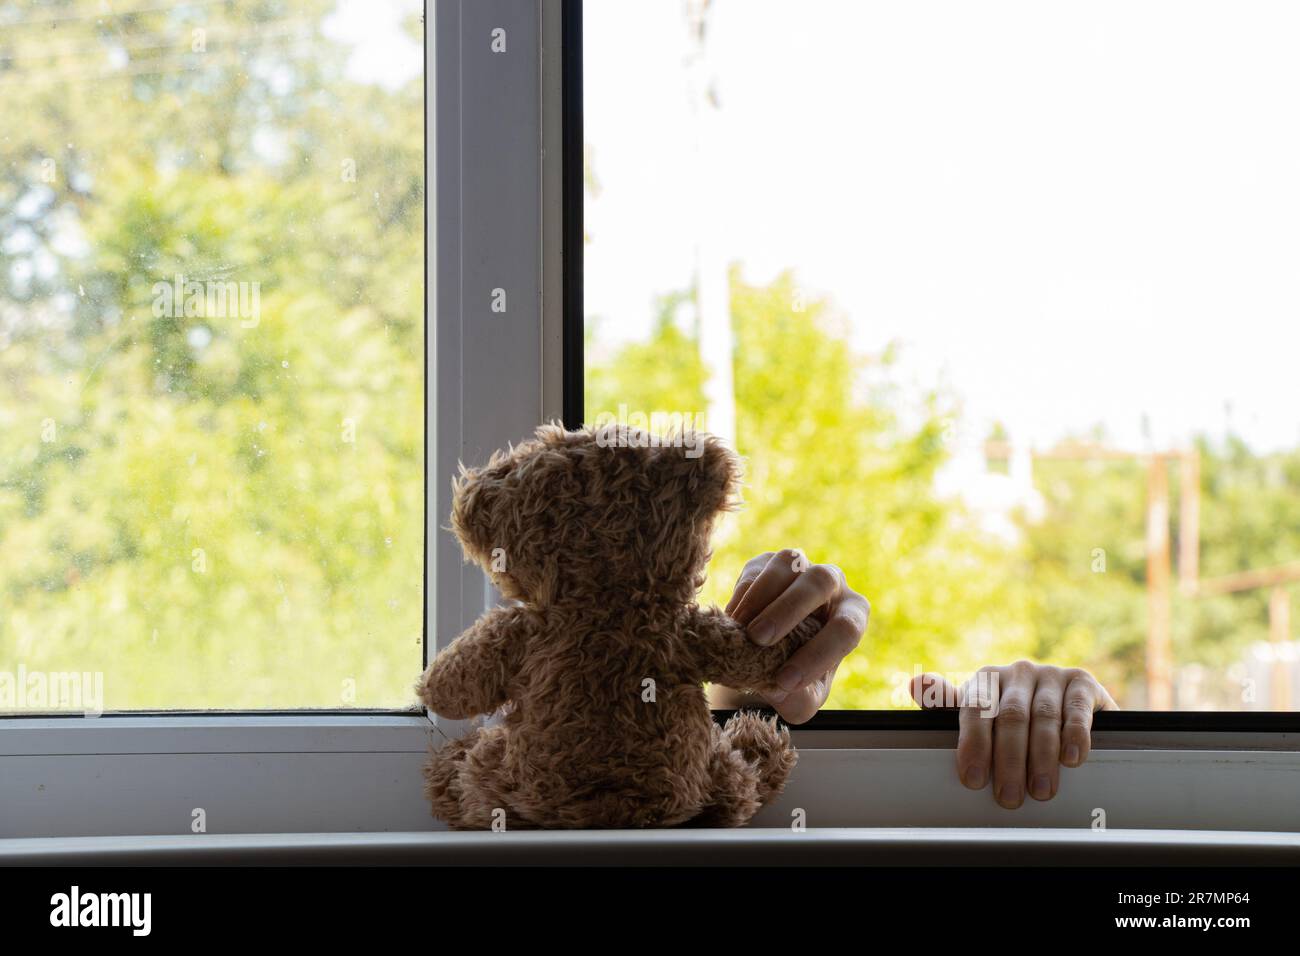 Children's hands hold on to the window from the side of the street and hold a teddy bear, suicide, hands outside the window, suicide Stock Photo